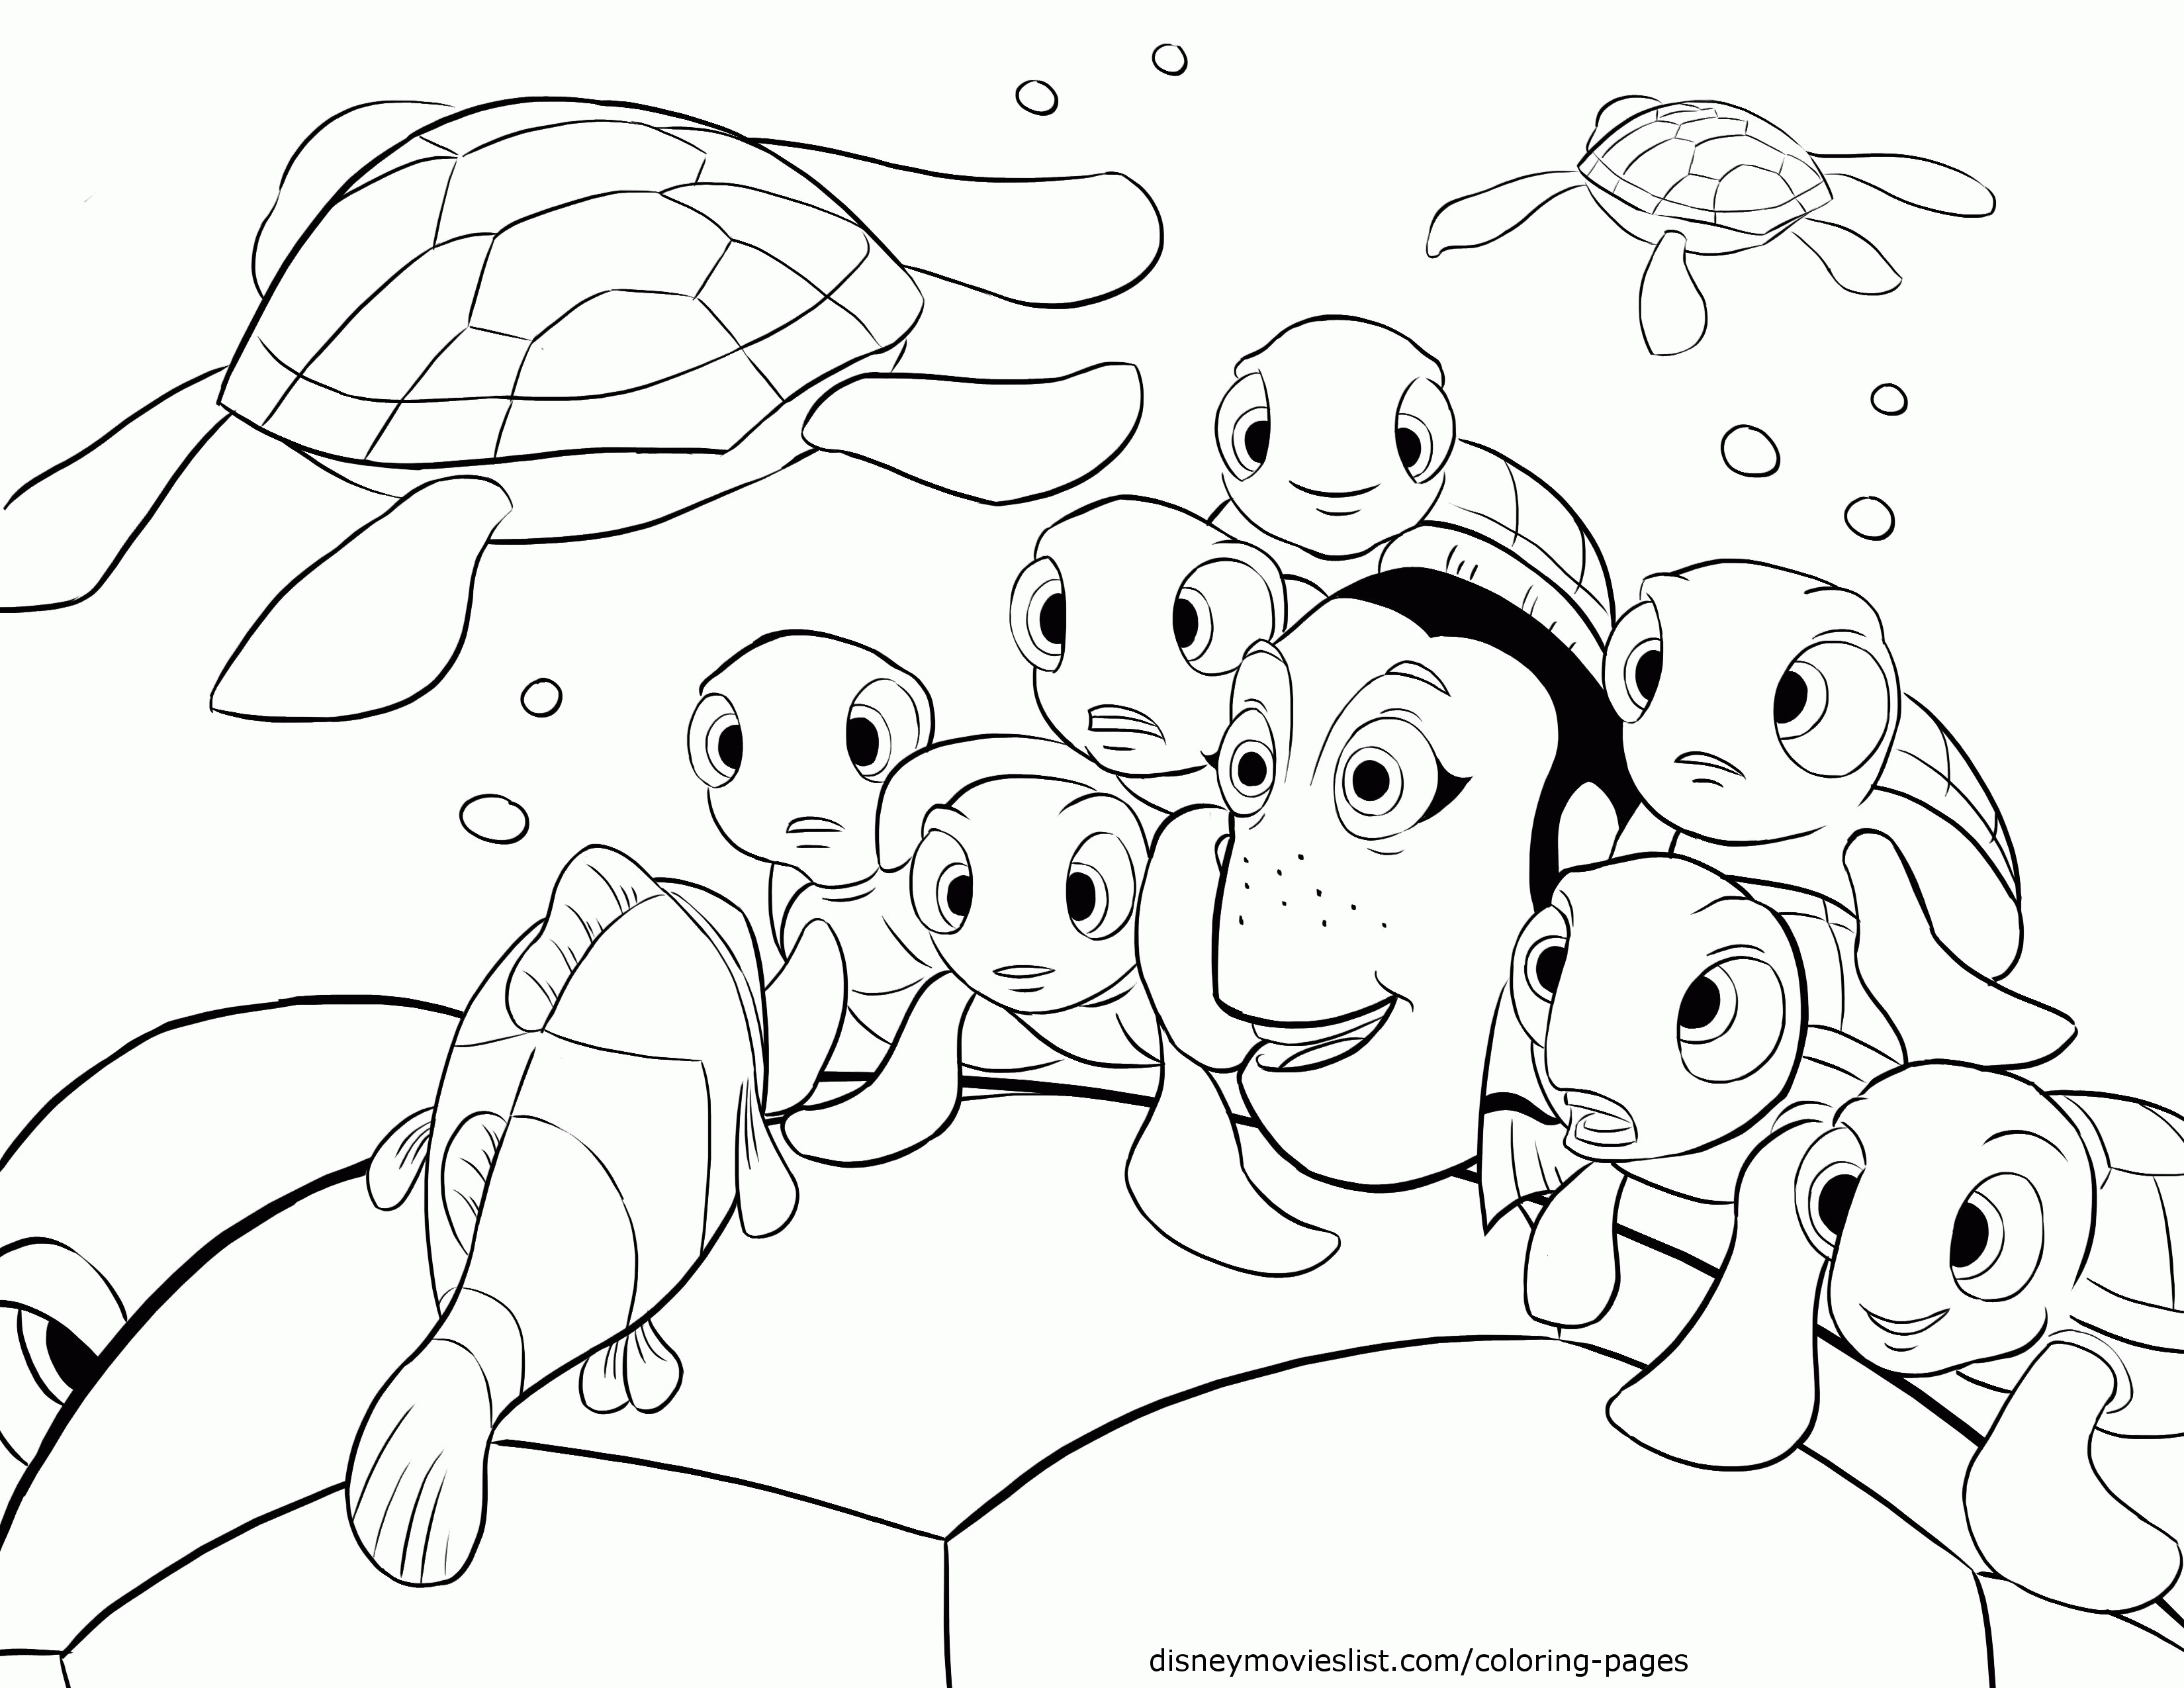 Finding Nemo Coloring Pages Nigel Clip Art Library 6900 | The Best Porn ...